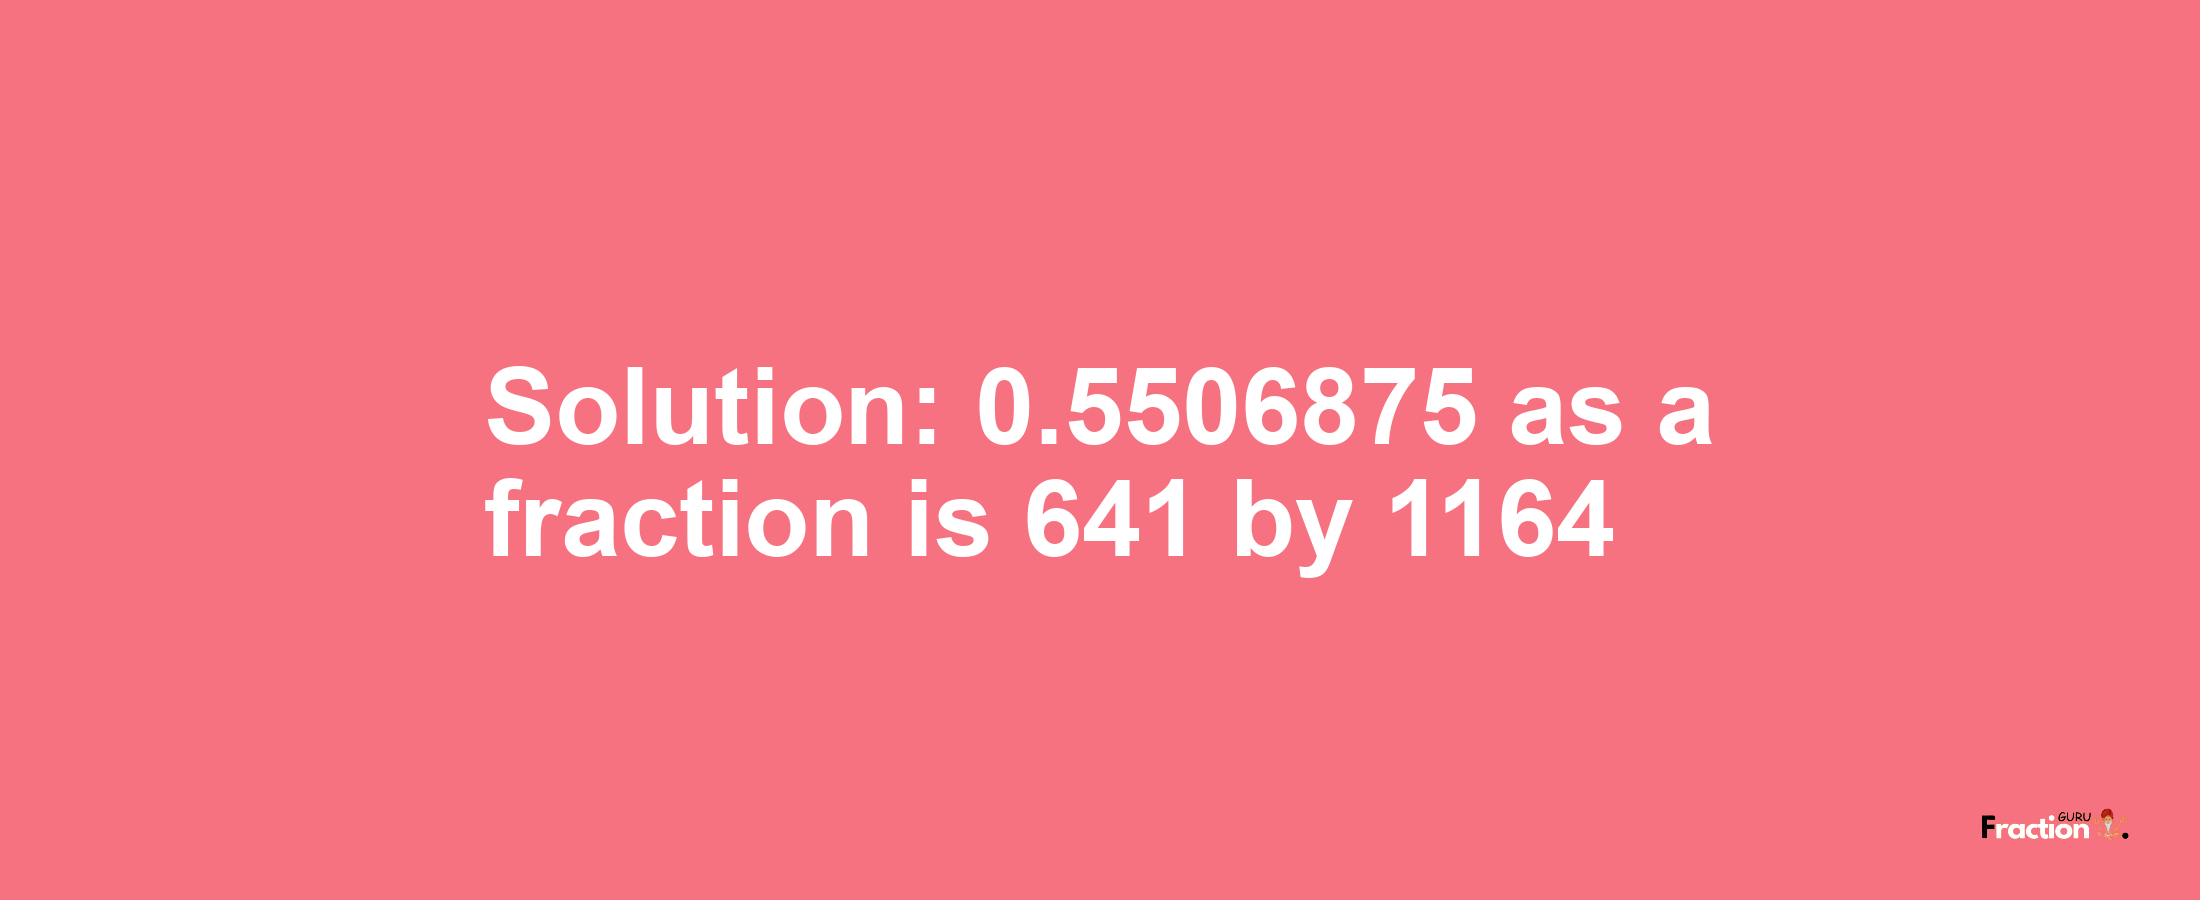 Solution:0.5506875 as a fraction is 641/1164